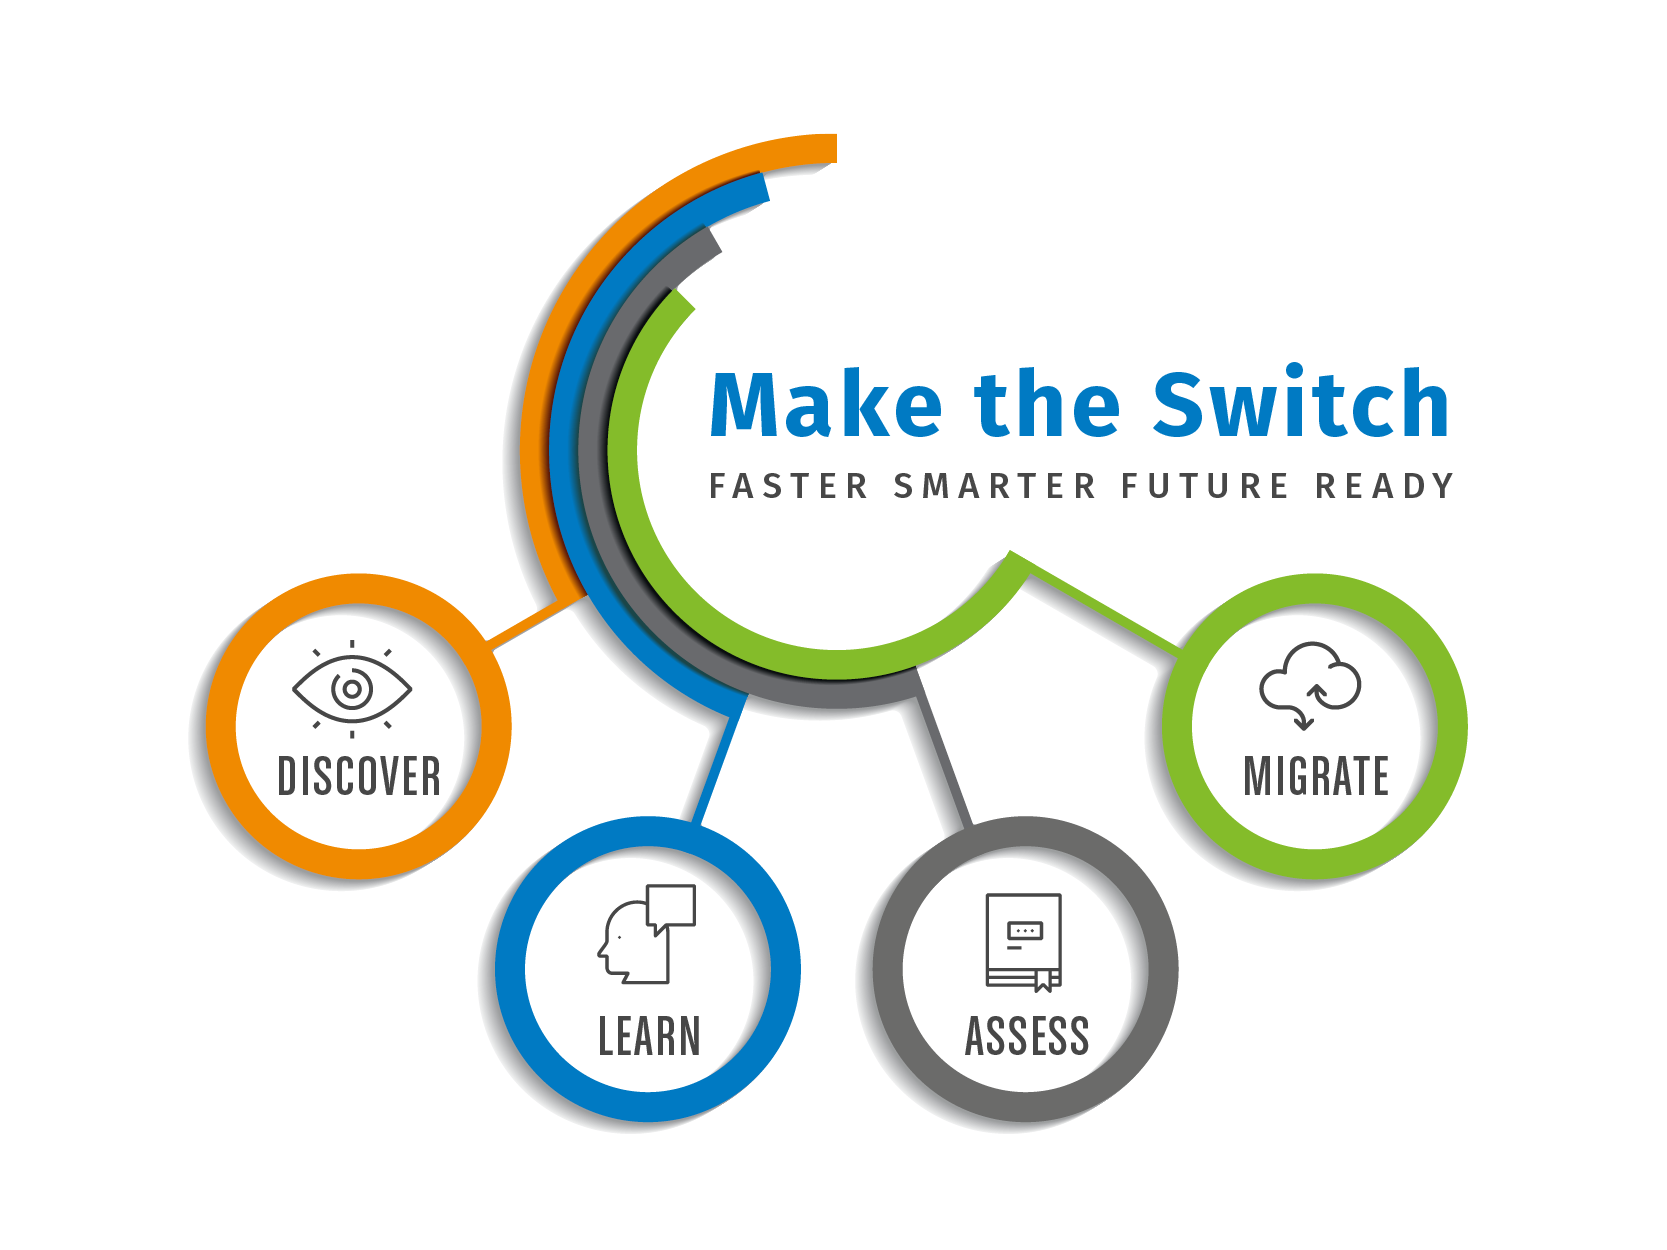 Make the Switch infographic